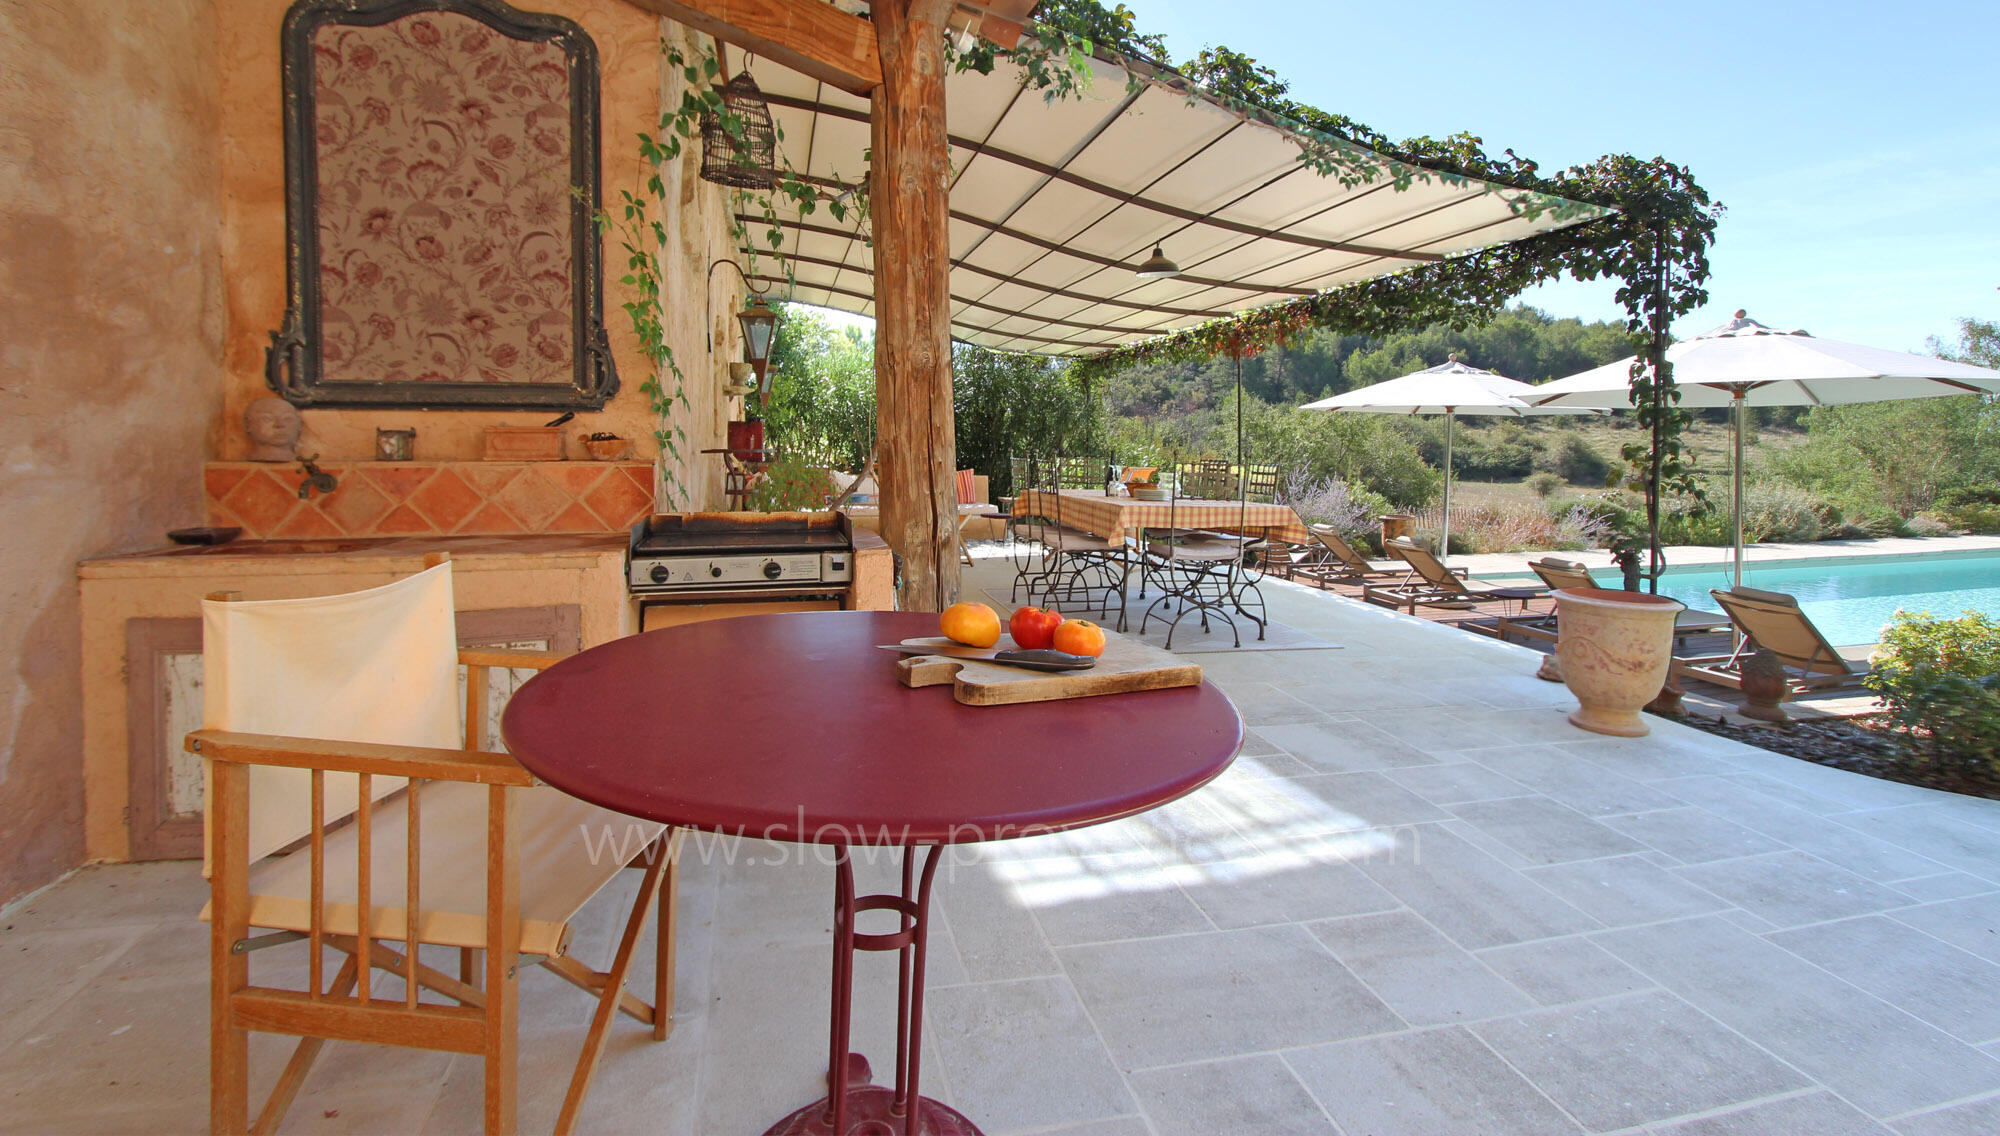 Terrace with gas barbecue